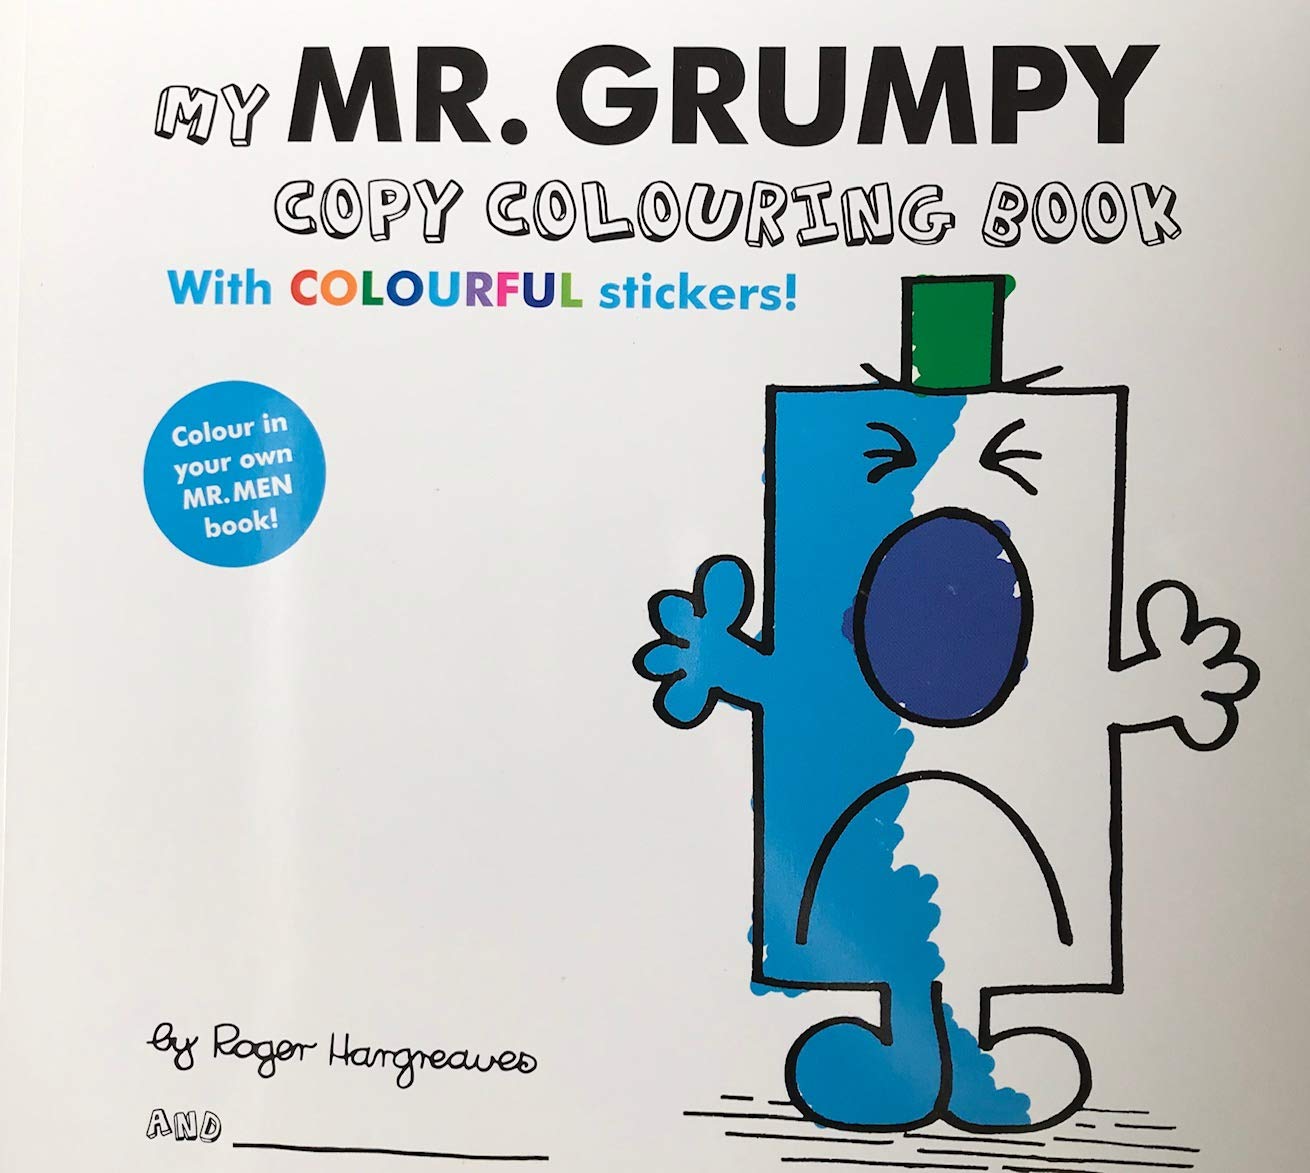 My Mr.Grumpy Copy Colouring Book With Colourful Stickers